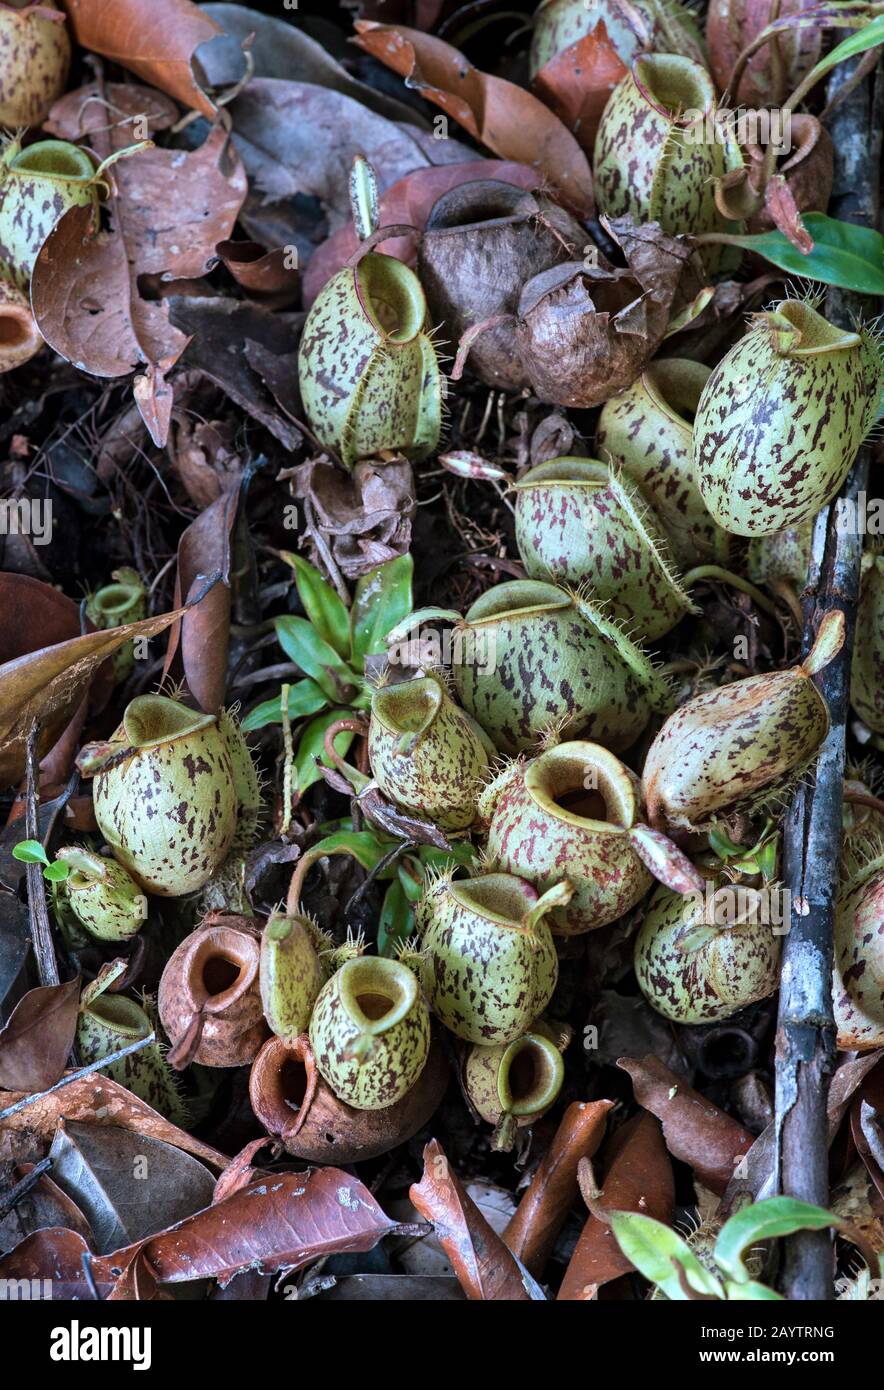 Cluster of ground pitchers of Nepenthes ampullaria in situ, Pitcher plant family (Nepenthaceae), Kinabatangan river flood plain, Sabah, Borneo, Malays Stock Photo